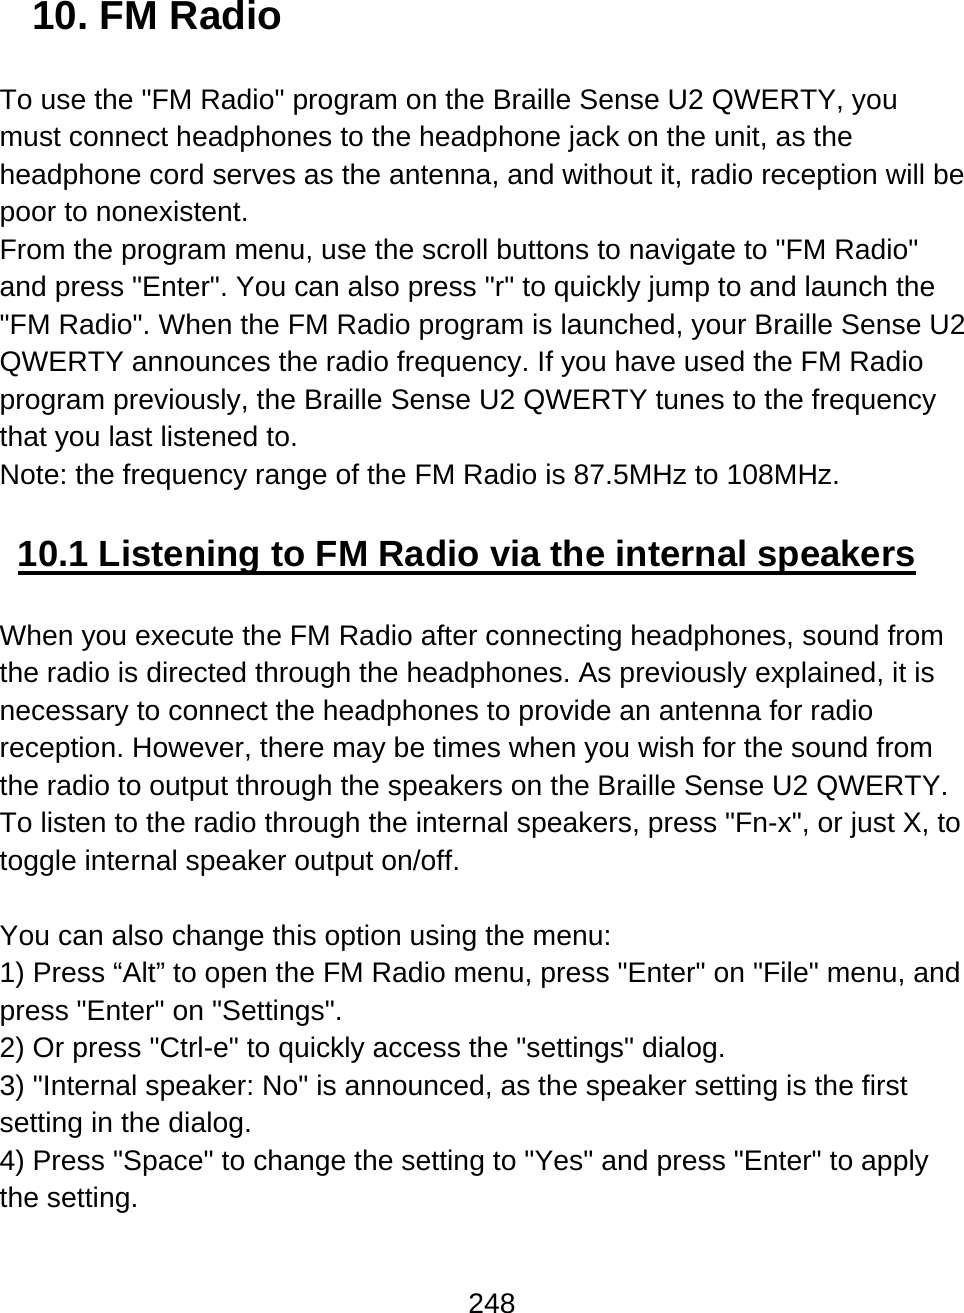 248  10. FM Radio  To use the &quot;FM Radio&quot; program on the Braille Sense U2 QWERTY, you must connect headphones to the headphone jack on the unit, as the headphone cord serves as the antenna, and without it, radio reception will be poor to nonexistent.  From the program menu, use the scroll buttons to navigate to &quot;FM Radio&quot; and press &quot;Enter&quot;. You can also press &quot;r&quot; to quickly jump to and launch the &quot;FM Radio&quot;. When the FM Radio program is launched, your Braille Sense U2 QWERTY announces the radio frequency. If you have used the FM Radio program previously, the Braille Sense U2 QWERTY tunes to the frequency that you last listened to. Note: the frequency range of the FM Radio is 87.5MHz to 108MHz.  10.1 Listening to FM Radio via the internal speakers  When you execute the FM Radio after connecting headphones, sound from the radio is directed through the headphones. As previously explained, it is necessary to connect the headphones to provide an antenna for radio reception. However, there may be times when you wish for the sound from the radio to output through the speakers on the Braille Sense U2 QWERTY. To listen to the radio through the internal speakers, press &quot;Fn-x&quot;, or just X, to toggle internal speaker output on/off.   You can also change this option using the menu:  1) Press “Alt” to open the FM Radio menu, press &quot;Enter&quot; on &quot;File&quot; menu, and press &quot;Enter&quot; on &quot;Settings&quot;. 2) Or press &quot;Ctrl-e&quot; to quickly access the &quot;settings&quot; dialog. 3) &quot;Internal speaker: No&quot; is announced, as the speaker setting is the first setting in the dialog. 4) Press &quot;Space&quot; to change the setting to &quot;Yes&quot; and press &quot;Enter&quot; to apply the setting.  